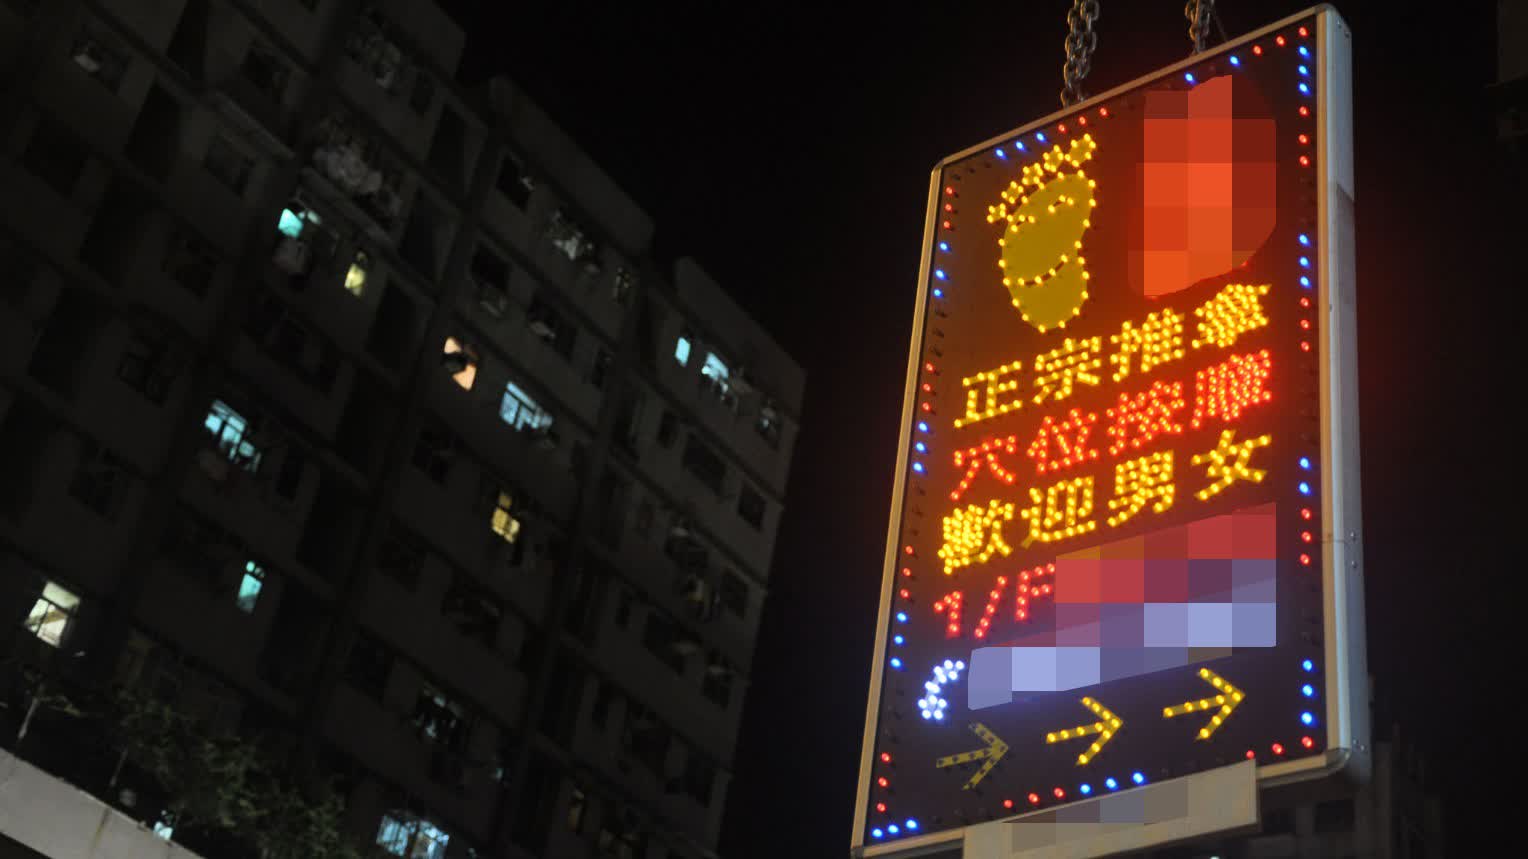 Journalists' Hands-On Experiences | Sham Shui Po grapples with surge in illicit massage parlors and prostitution concerns